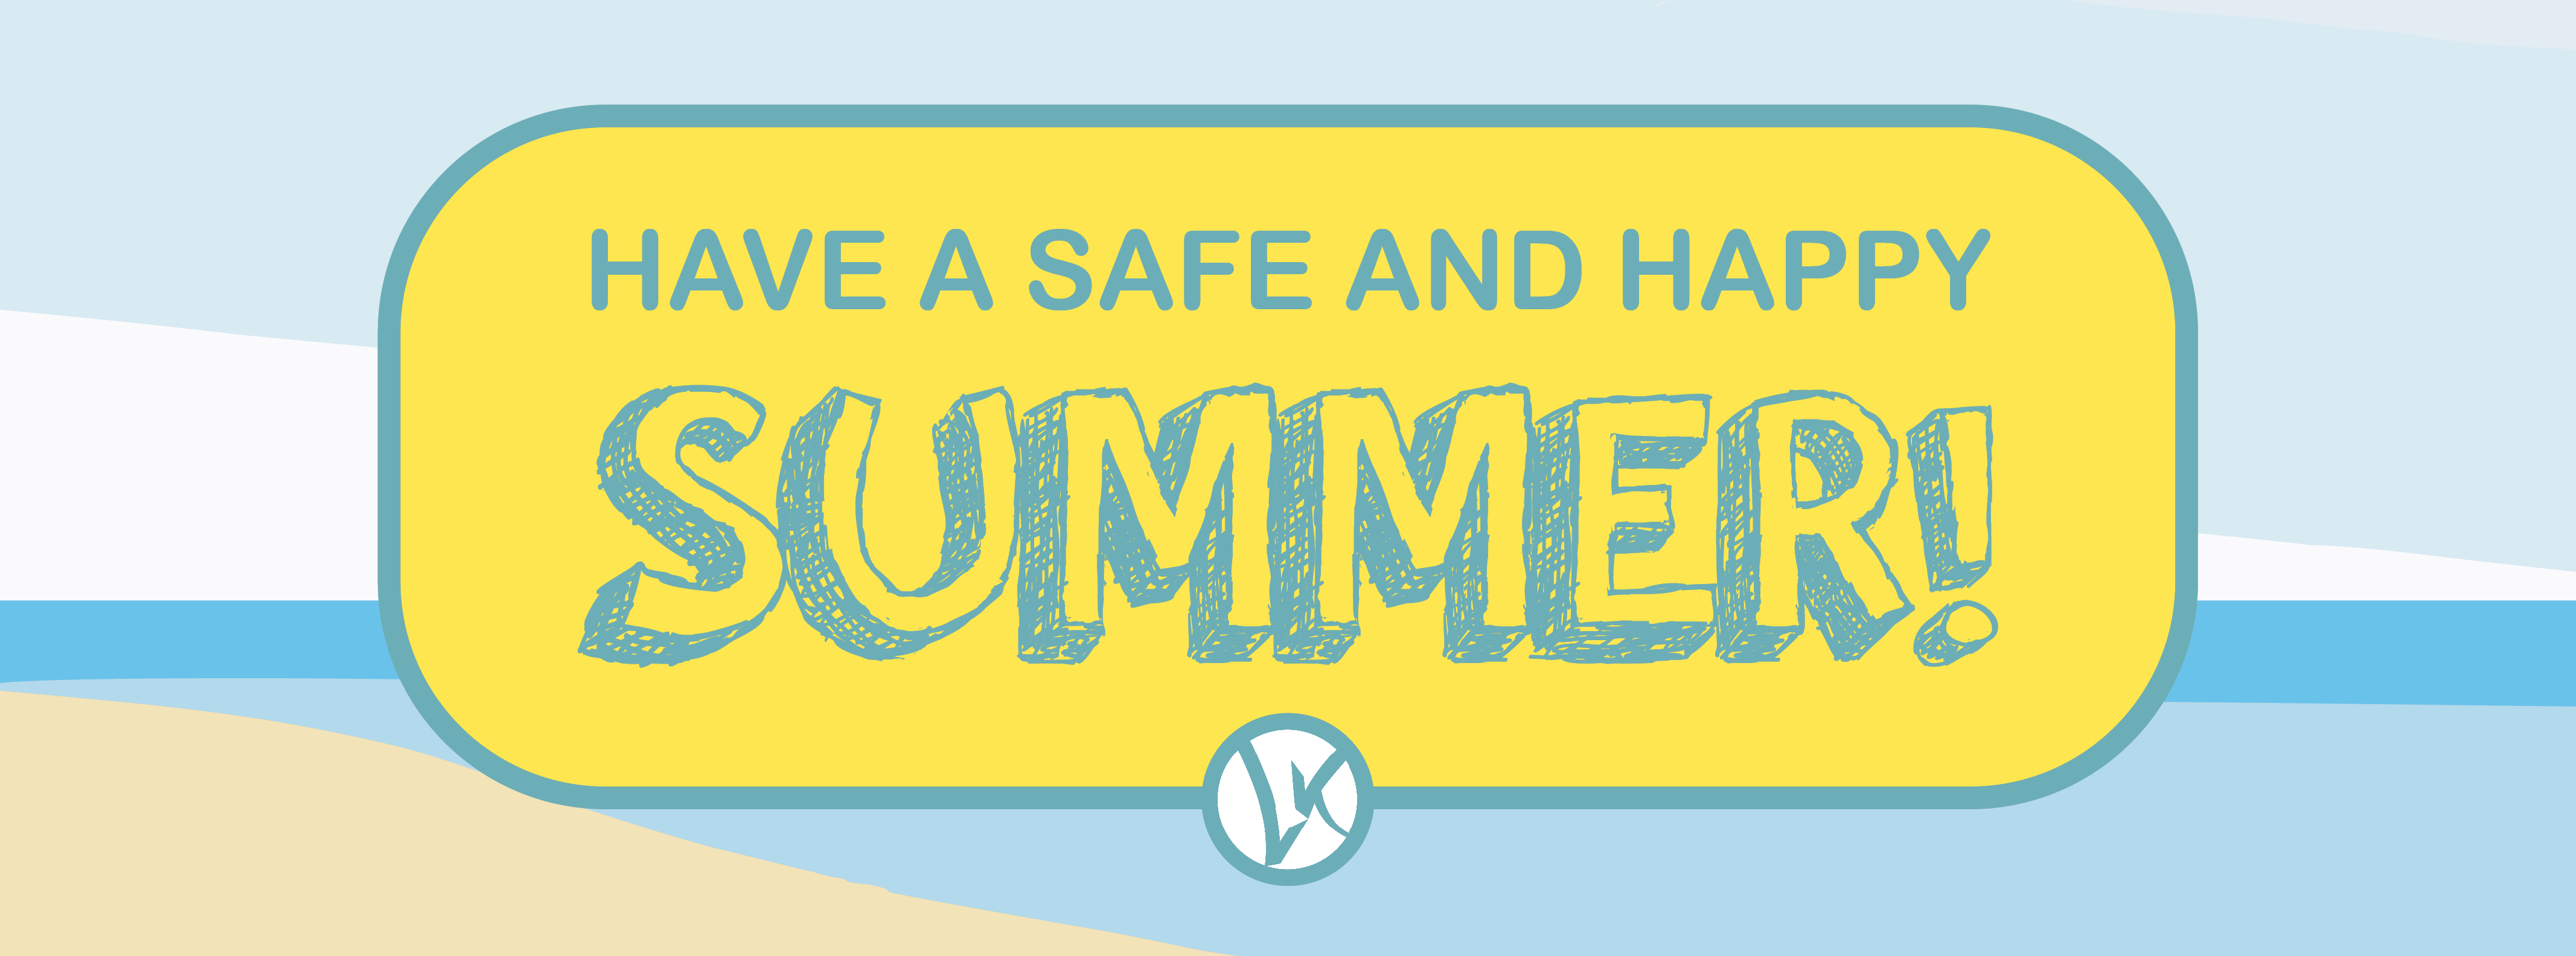 Wishing students and families a safe and happy summer